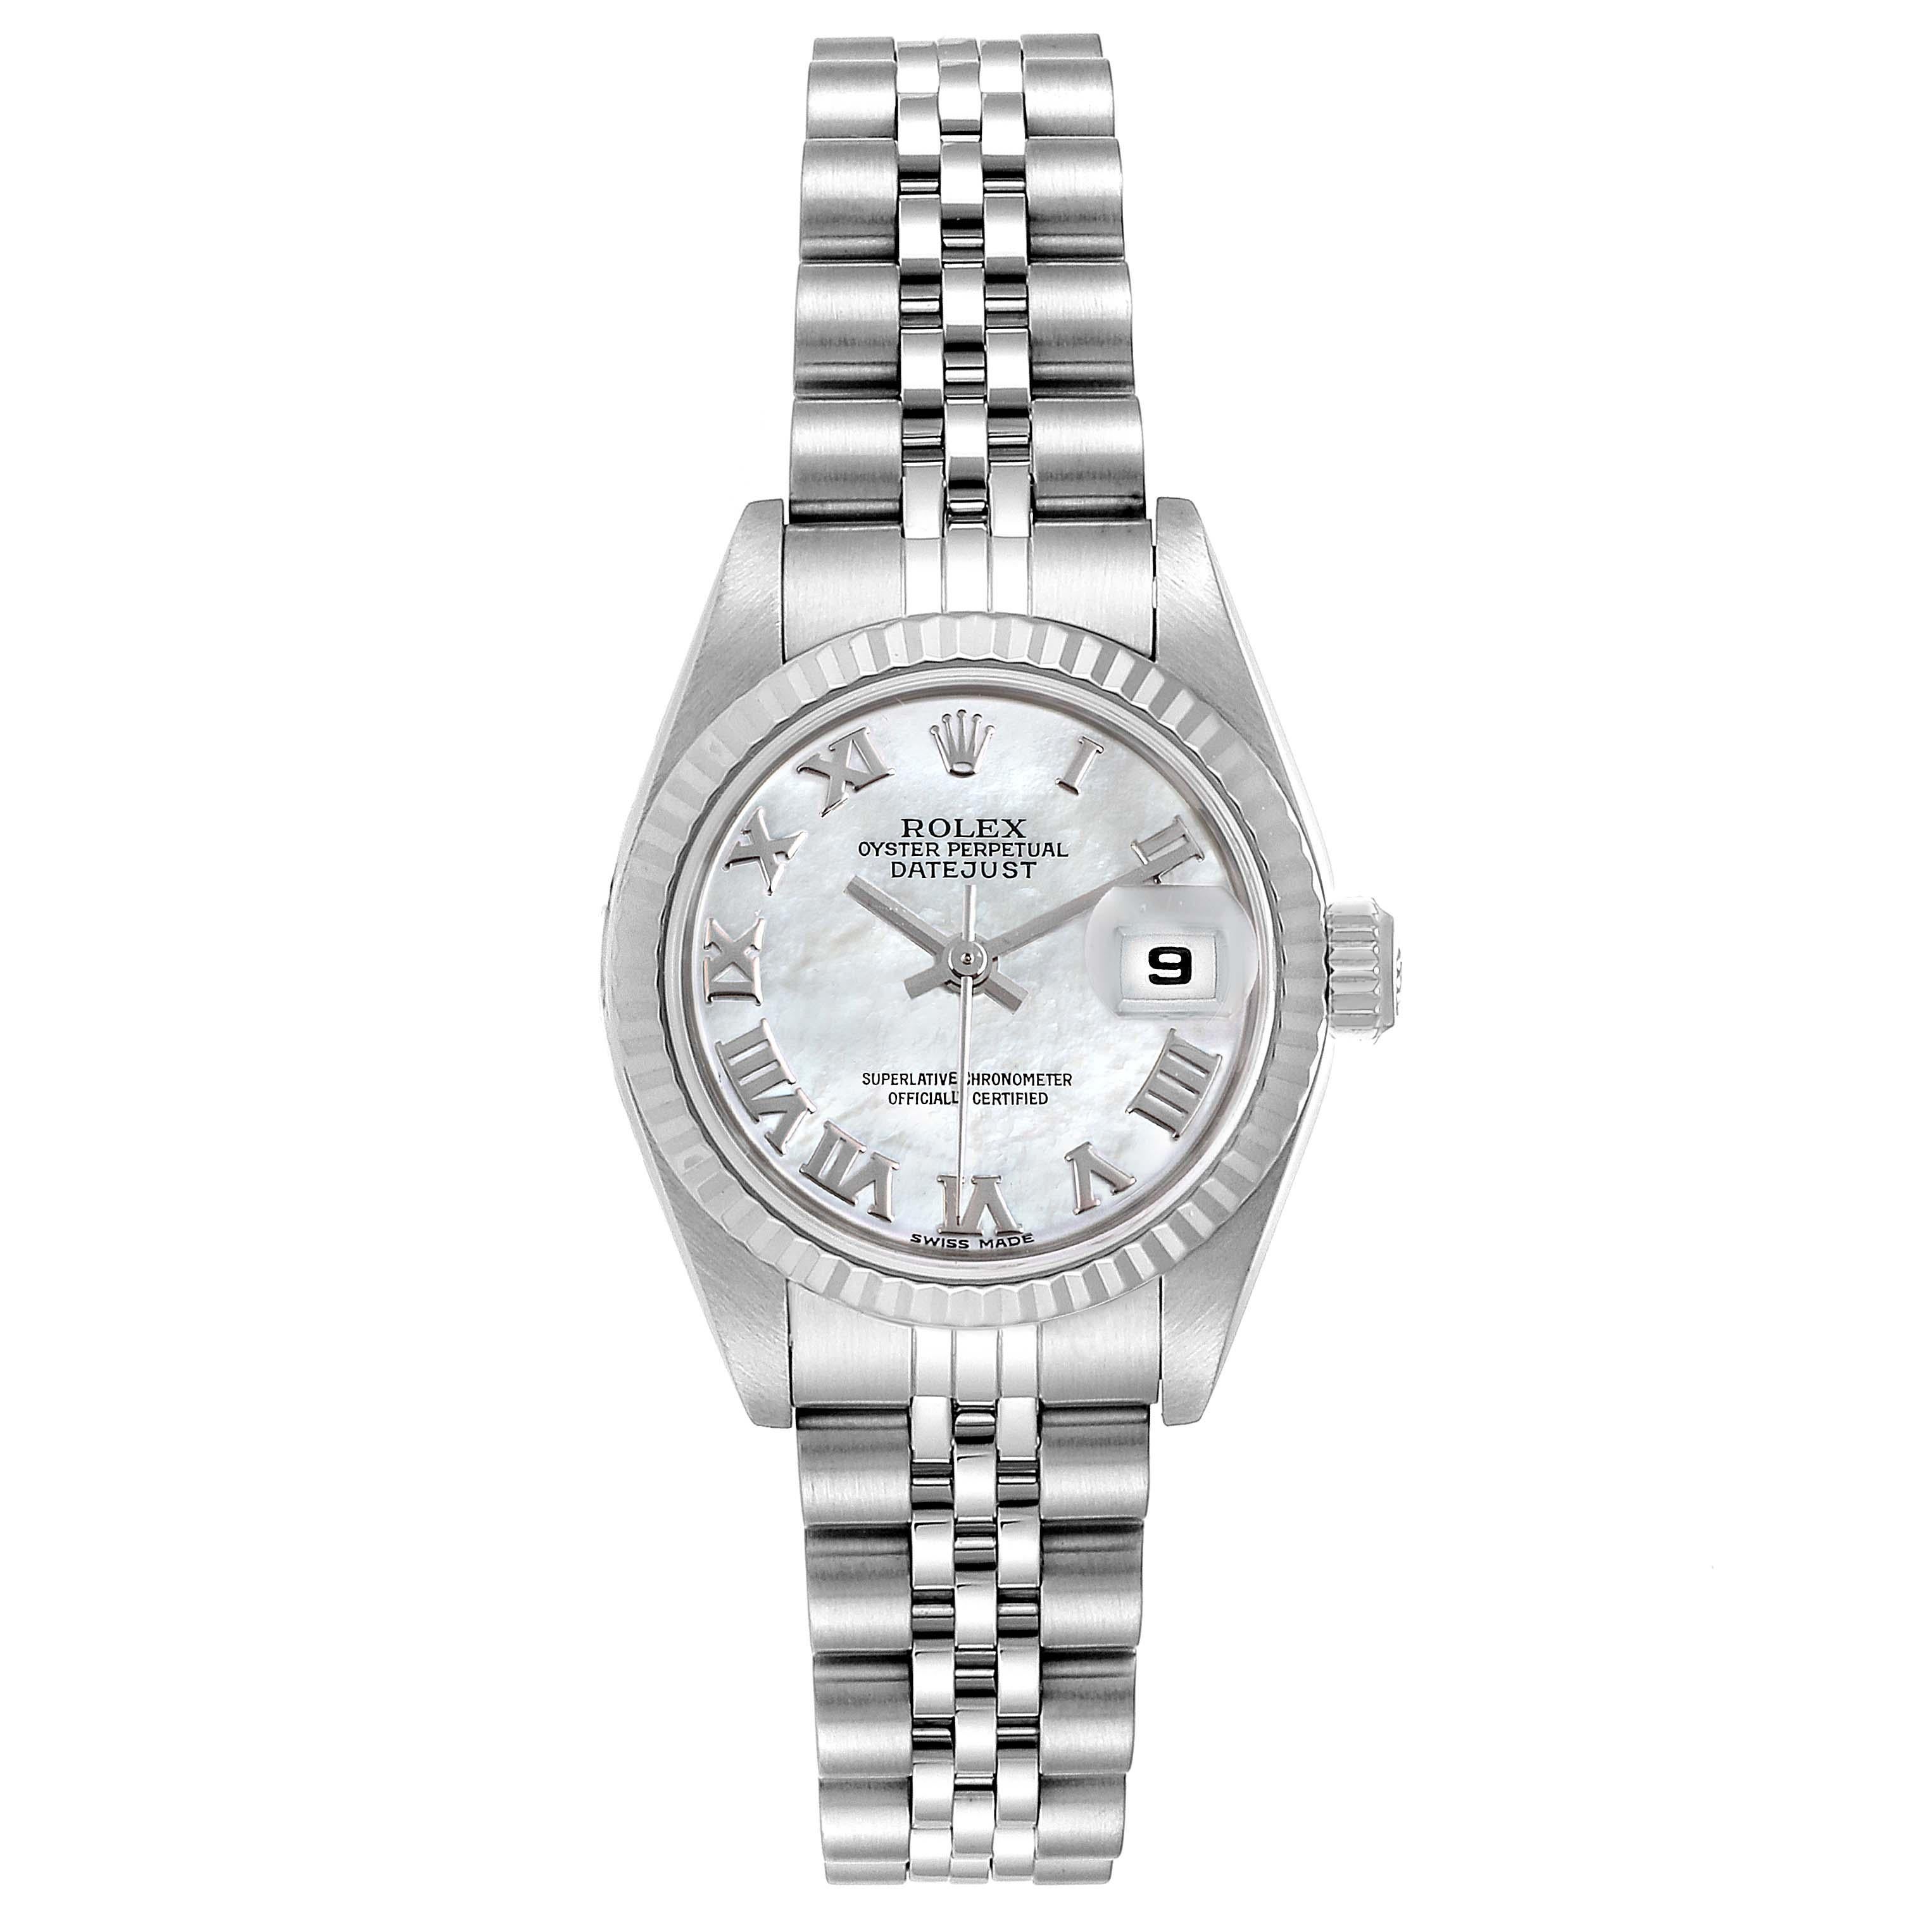 Rolex Datejust Mother of Pearl Dial Steel White Gold Ladies Watch 79174. Officially certified chronometer self-winding movement. Stainless steel oyster case 26.0 mm in diameter. Rolex logo on a crown. 18k white gold fluted bezel. Scratch resistant